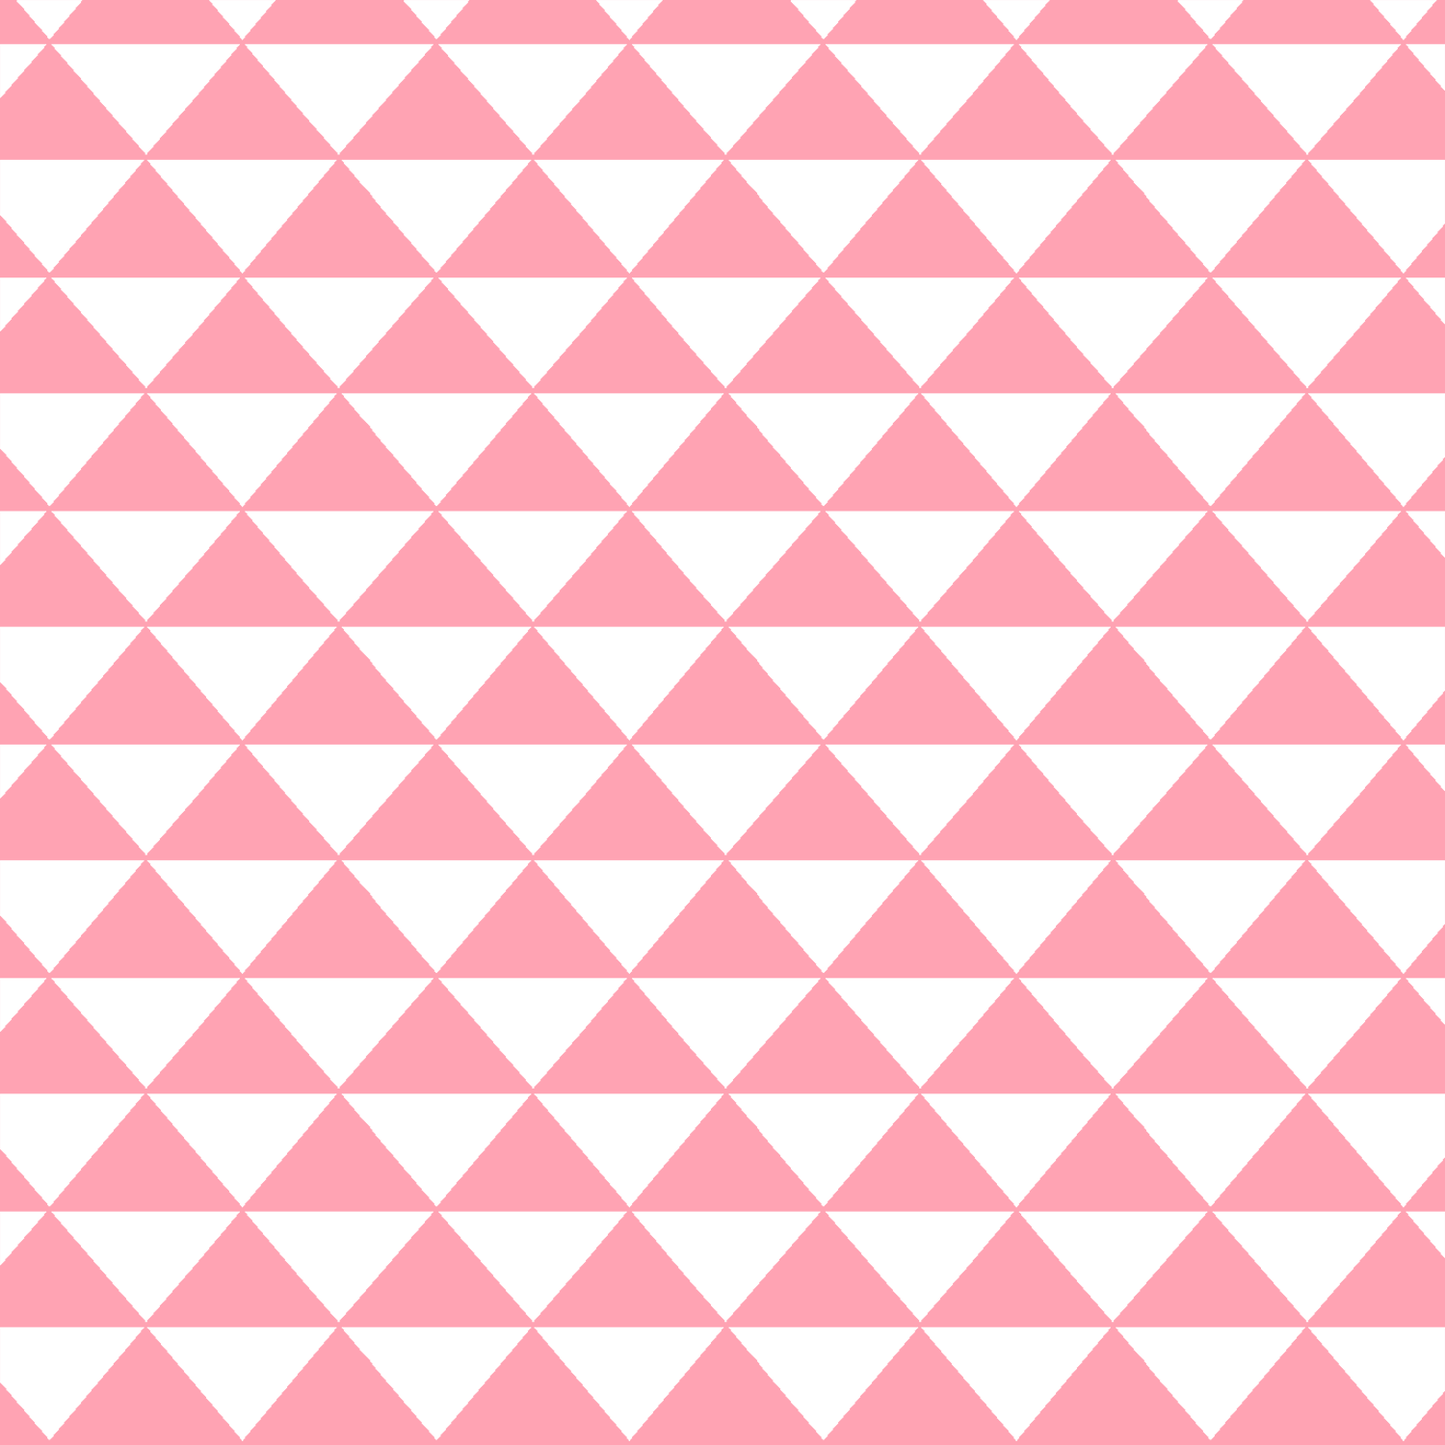 Triangle Mosaic in Rose Pink